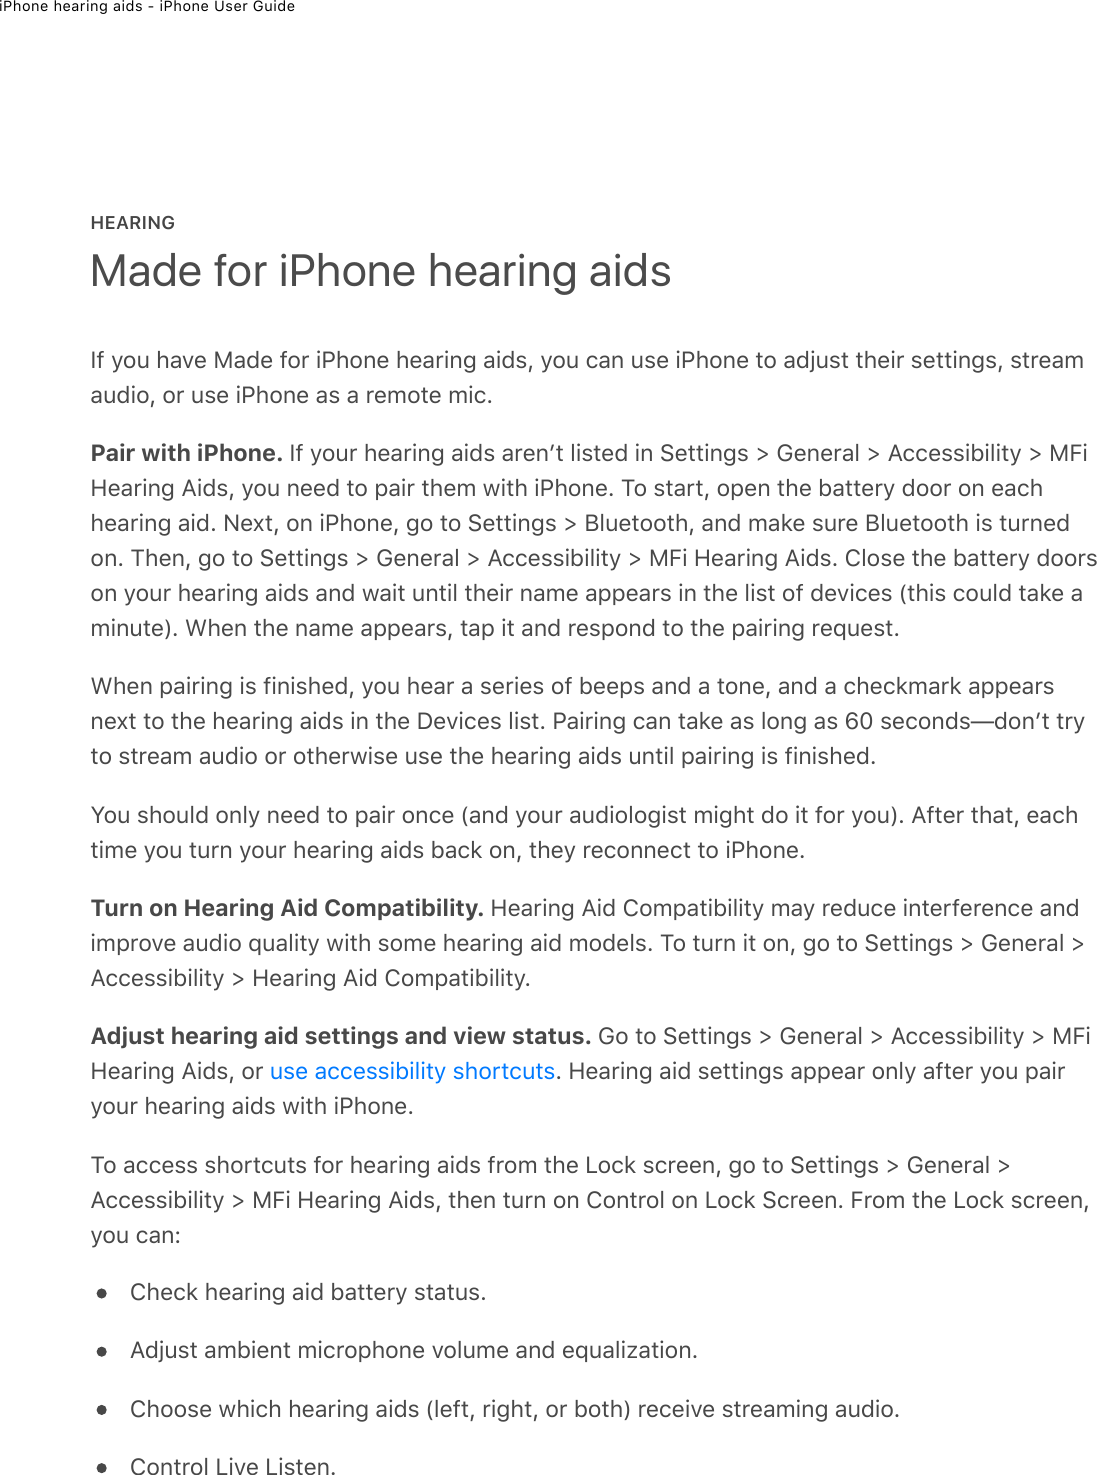  iPhone hearing aids - iPhone User GuideHEARINGIf you have Made for iPhone hearing aids, you can use iPhone to adjust their settings, streamaudio, or use iPhone as a remote mic.Pair with iPhone. If your hearing aids arenʼt listed in Settings &gt; General &gt; Accessibility &gt; MFiHearing Aids, you need to pair them with iPhone. To start, open the battery door on eachhearing aid. Next, on iPhone, go to Settings &gt; Bluetooth, and make sure Bluetooth is turnedon. Then, go to Settings &gt; General &gt; Accessibility &gt; MFi Hearing Aids. Close the battery doorson your hearing aids and wait until their name appears in the list of devices (this could take aminute). When the name appears, tap it and respond to the pairing request.When pairing is finished, you hear a series of beeps and a tone, and a checkmark appearsnext to the hearing aids in the Devices list. Pairing can take as long as 60 seconds—donʼt tryto stream audio or otherwise use the hearing aids until pairing is finished.You should only need to pair once (and your audiologist might do it for you). After that, eachtime you turn your hearing aids back on, they reconnect to iPhone.Turn on Hearing Aid Compatibility. Hearing Aid Compatibility may reduce interference andimprove audio quality with some hearing aid models. To turn it on, go to Settings &gt; General &gt;Accessibility &gt; Hearing Aid Compatibility.Adjust hearing aid settings and view status. Go to Settings &gt; General &gt; Accessibility &gt; MFiHearing Aids, or  . Hearing aid settings appear only after you pairyour hearing aids with iPhone.To access shortcuts for hearing aids from the Lock screen, go to Settings &gt; General &gt;Accessibility &gt; MFi Hearing Aids, then turn on Control on Lock Screen. From the Lock screen,you can:Check hearing aid battery status.Adjust ambient microphone volume and equalization.Choose which hearing aids (left, right, or both) receive streaming audio.Control Live Listen.Made for iPhone hearing aidsuse accessibility shortcuts